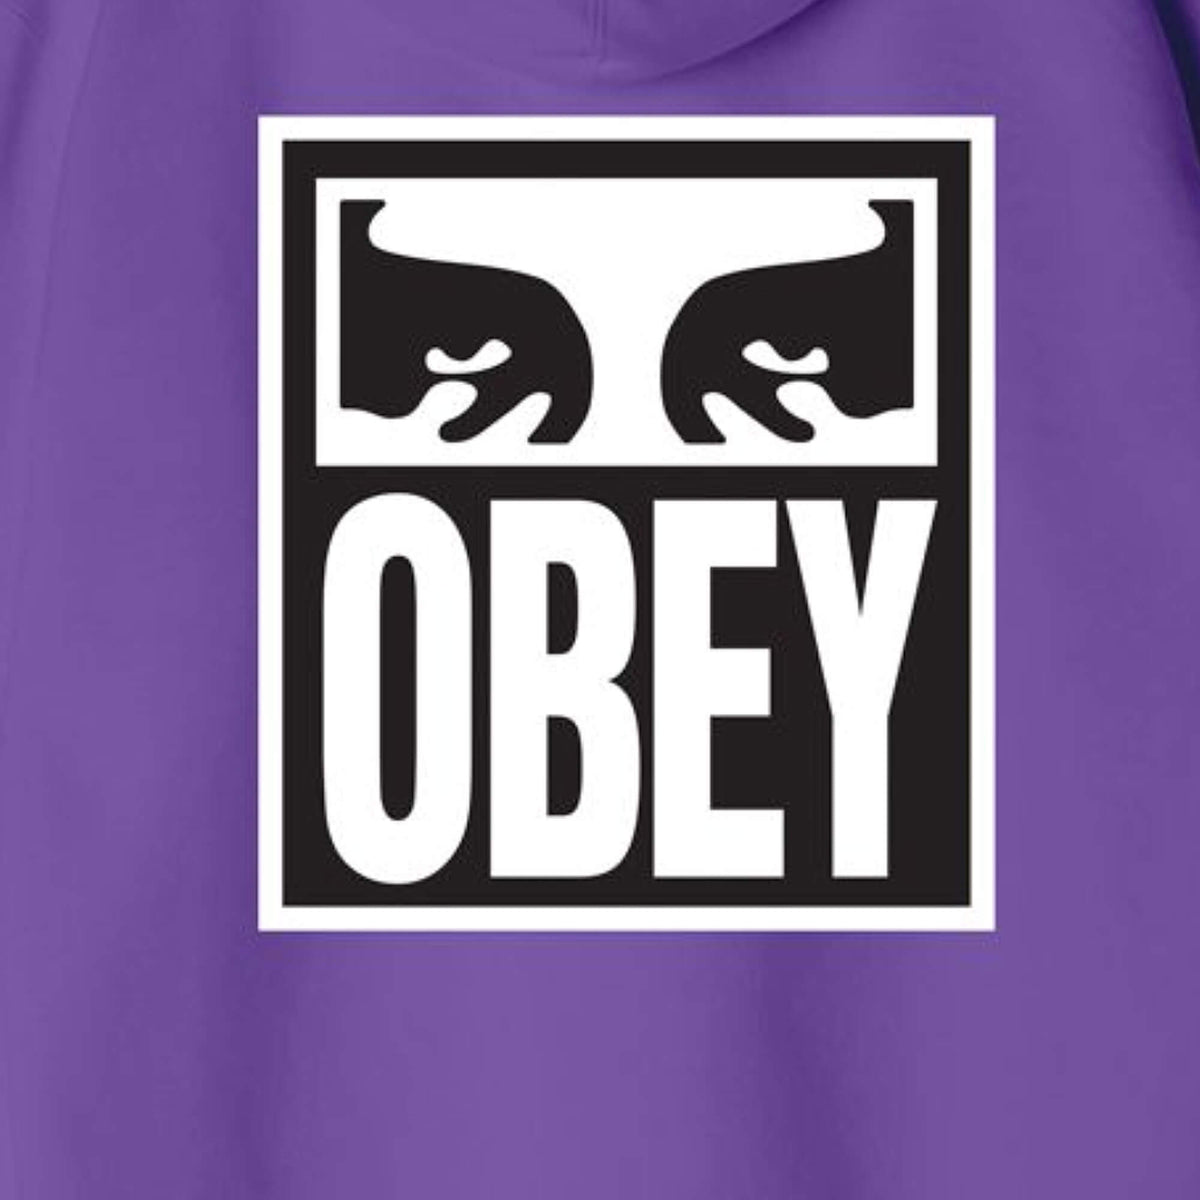 OBEY Eyes Icon Pullover Hoodie Passion Flower Purple